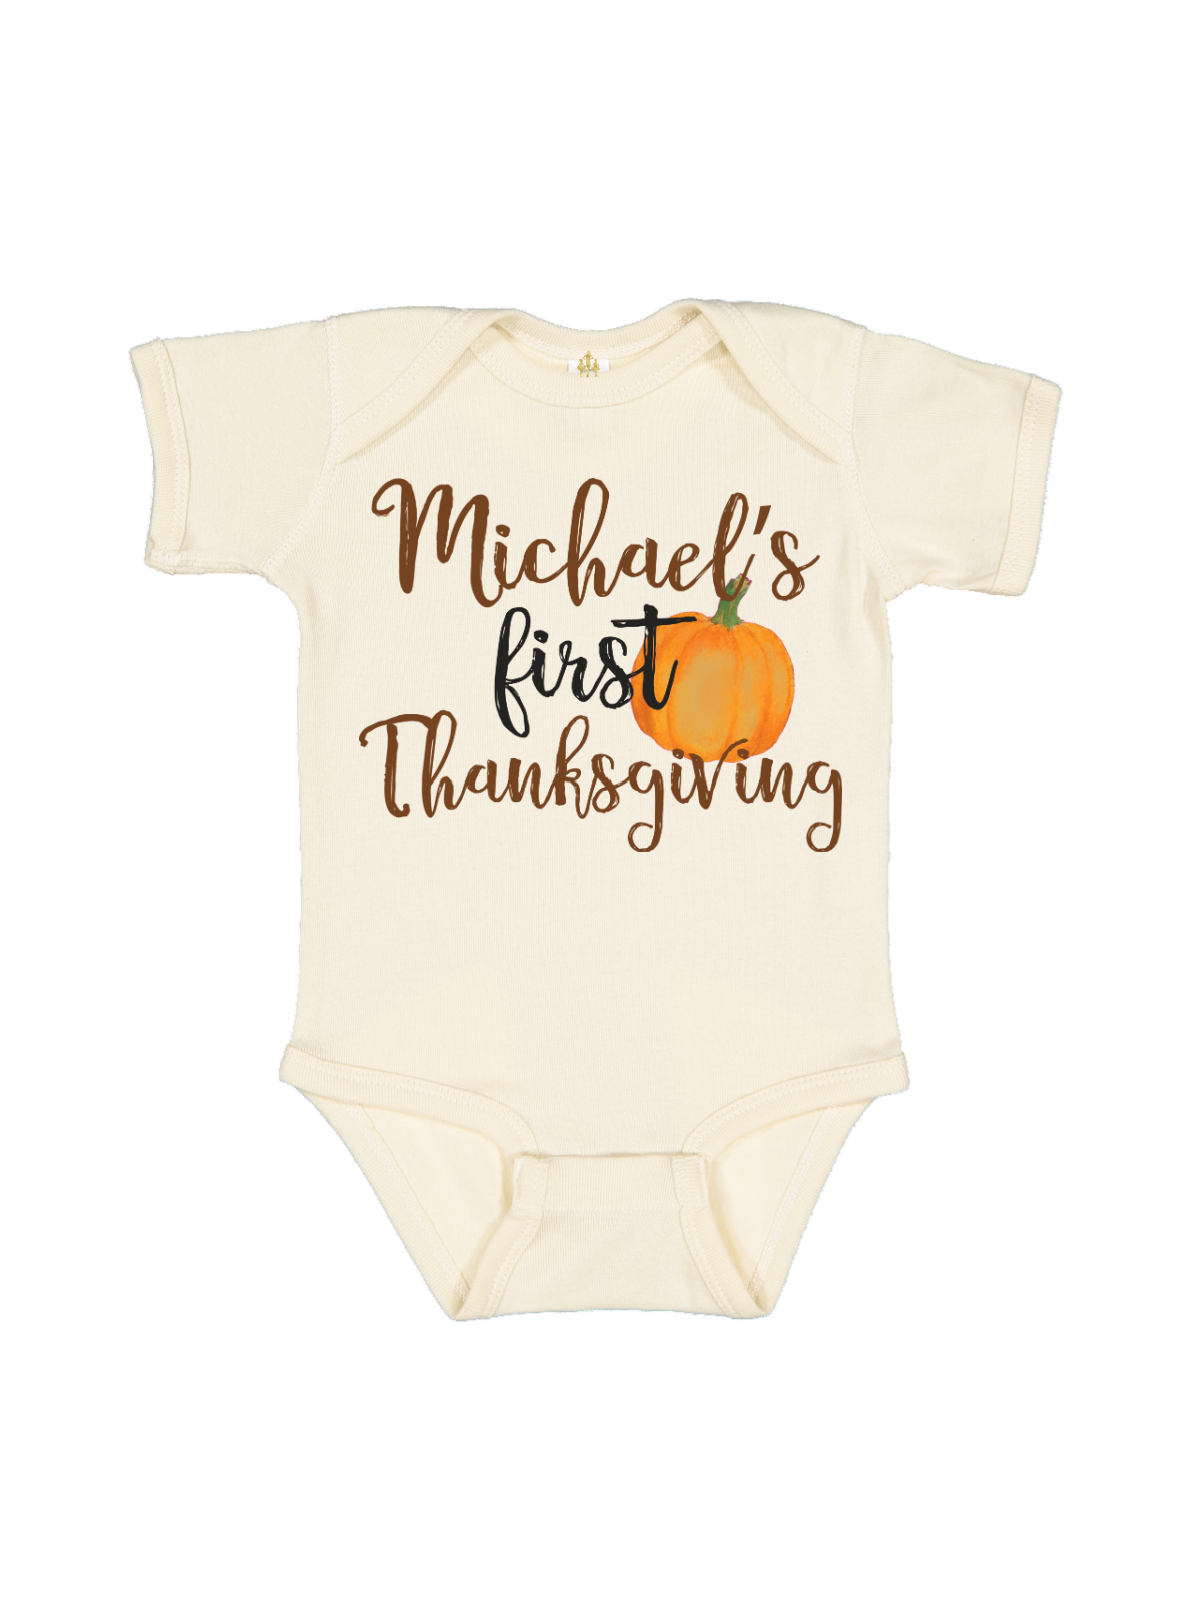 Boys First Thanksgiving Baby Bodysuit in Natural